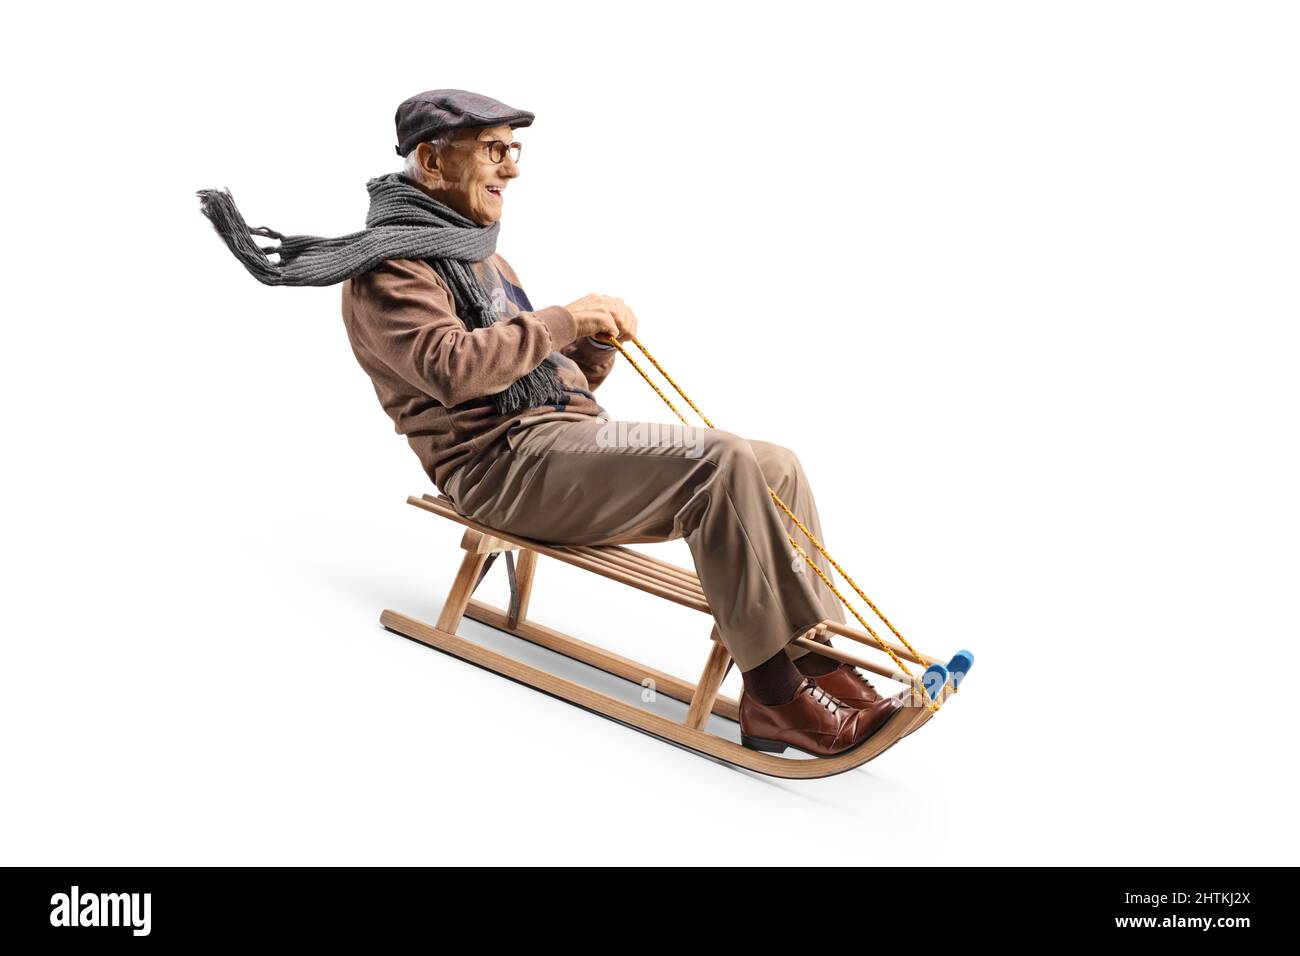 Elderly man riding on a wooden sleigh isolated on white background Stock Photo